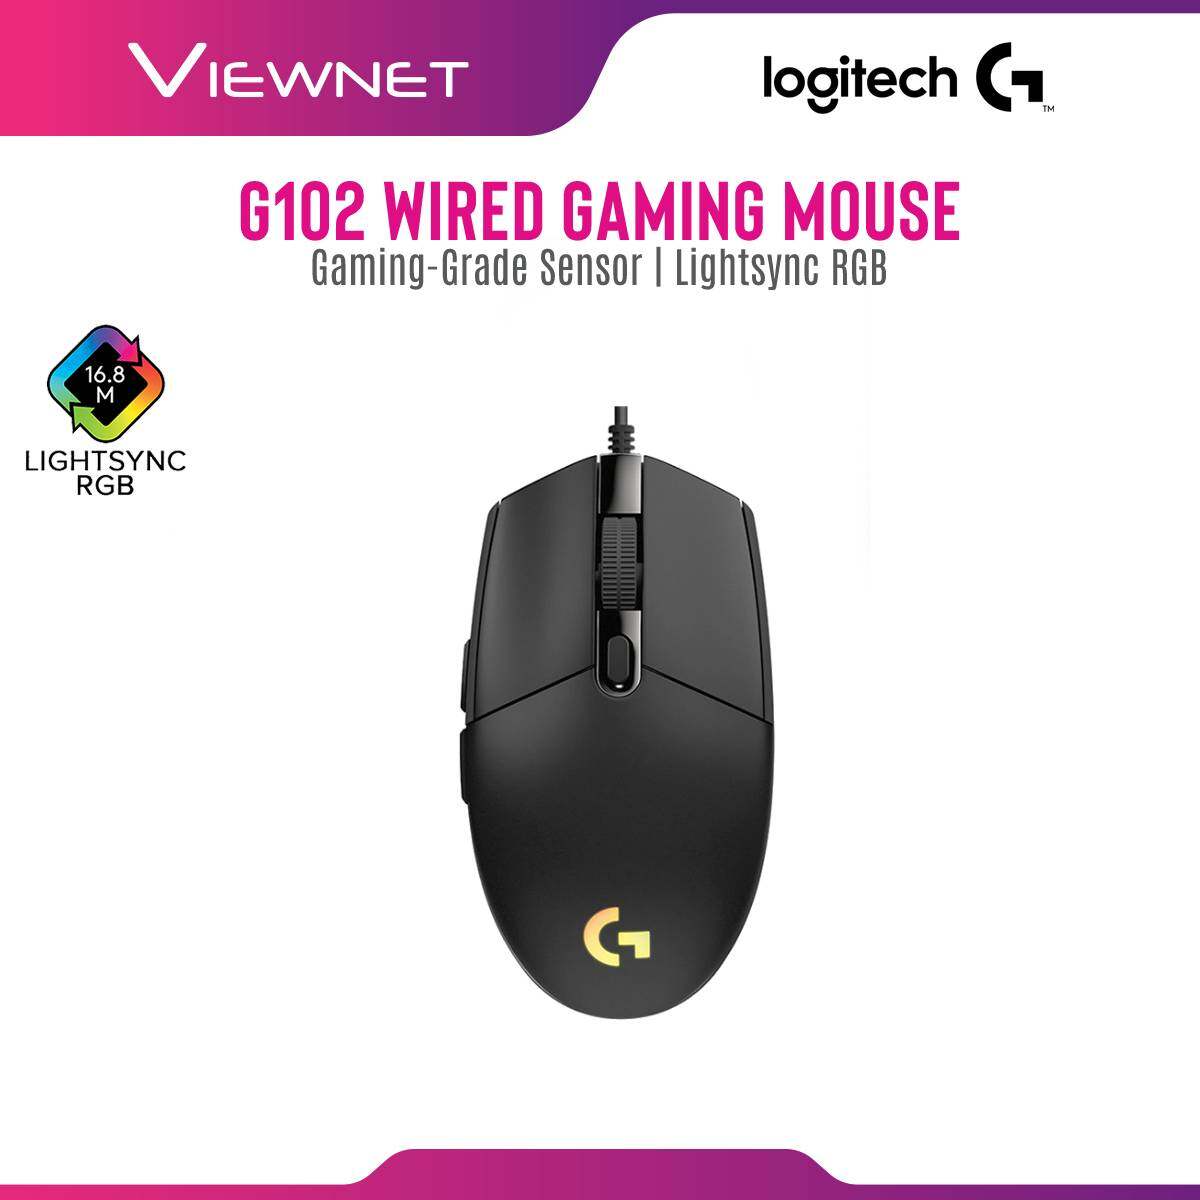 Logitech G102 Wired Gaming Mouse with Lightsync RGB Lighting Max 8000 DPI Gaming Grade-Sensor Logitech G Hub Gaming Software Support